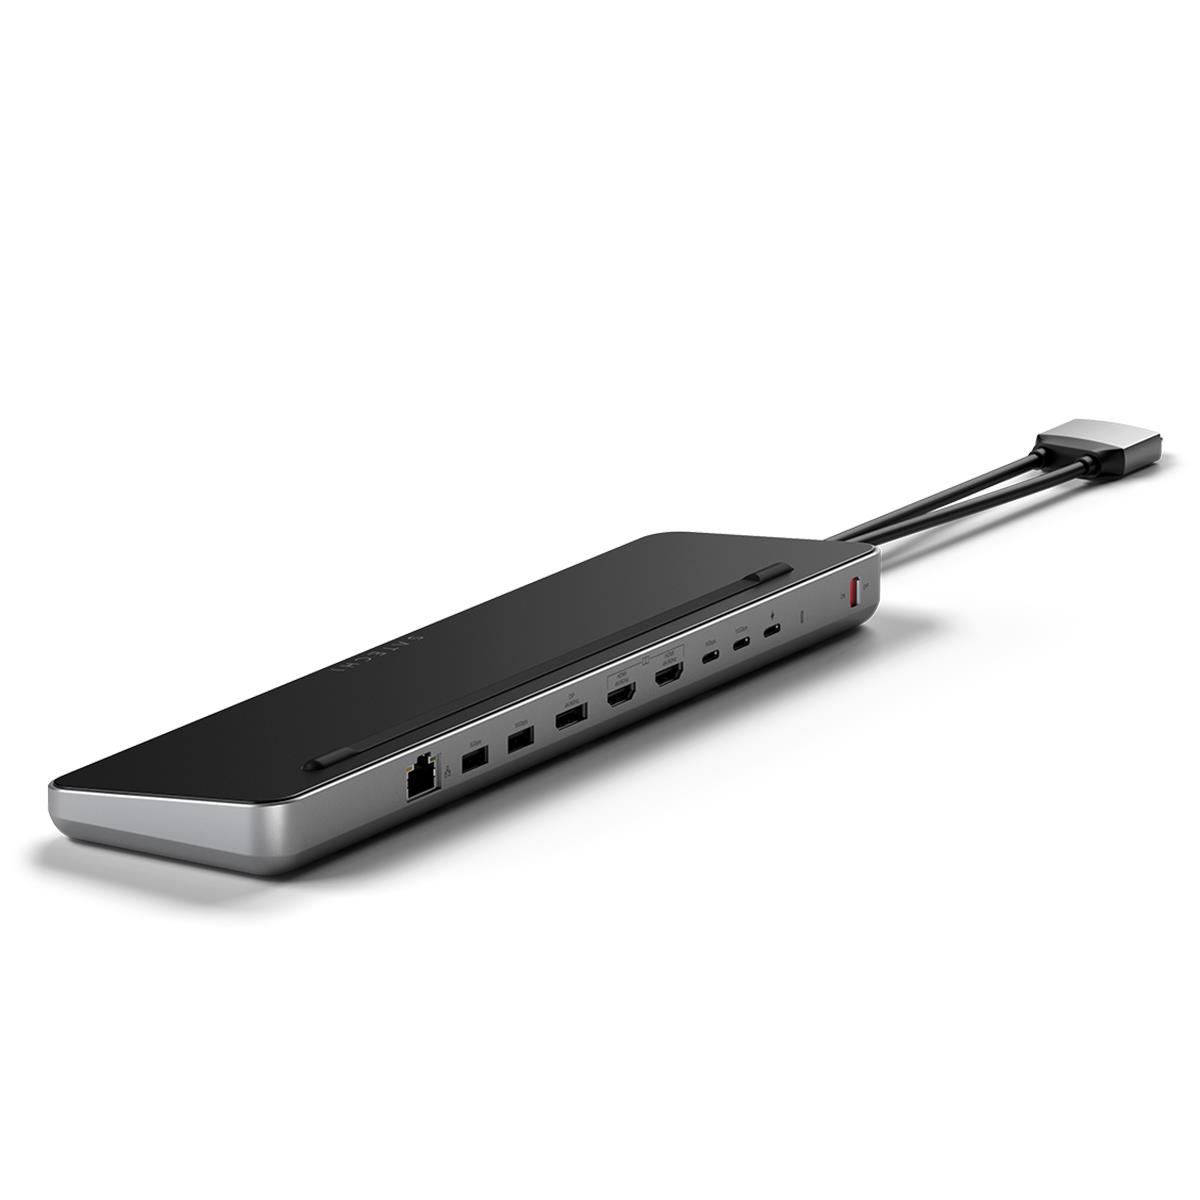 Image of Satechi Dual Dock Stand with NVMe SSD Enclosure